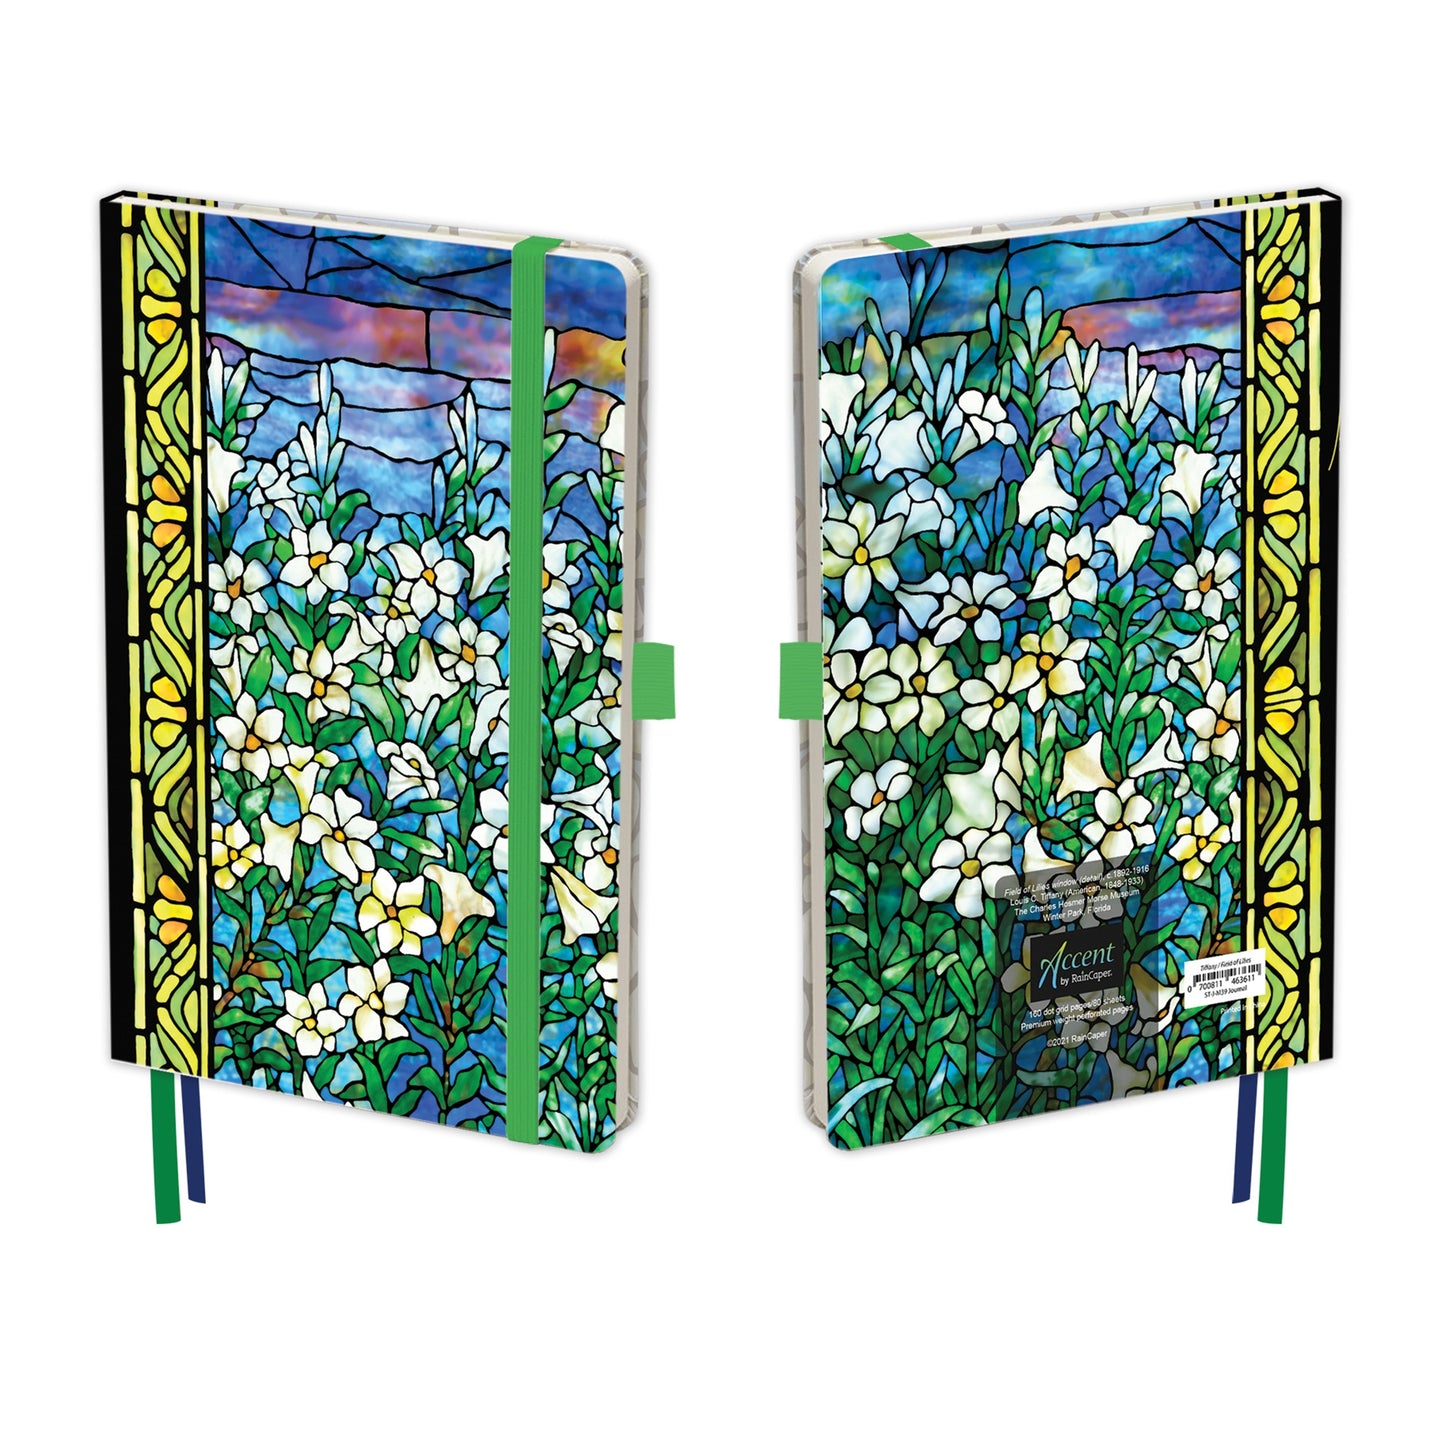 Vegan Leather Journal: Tiffany's "Field of Lilies"